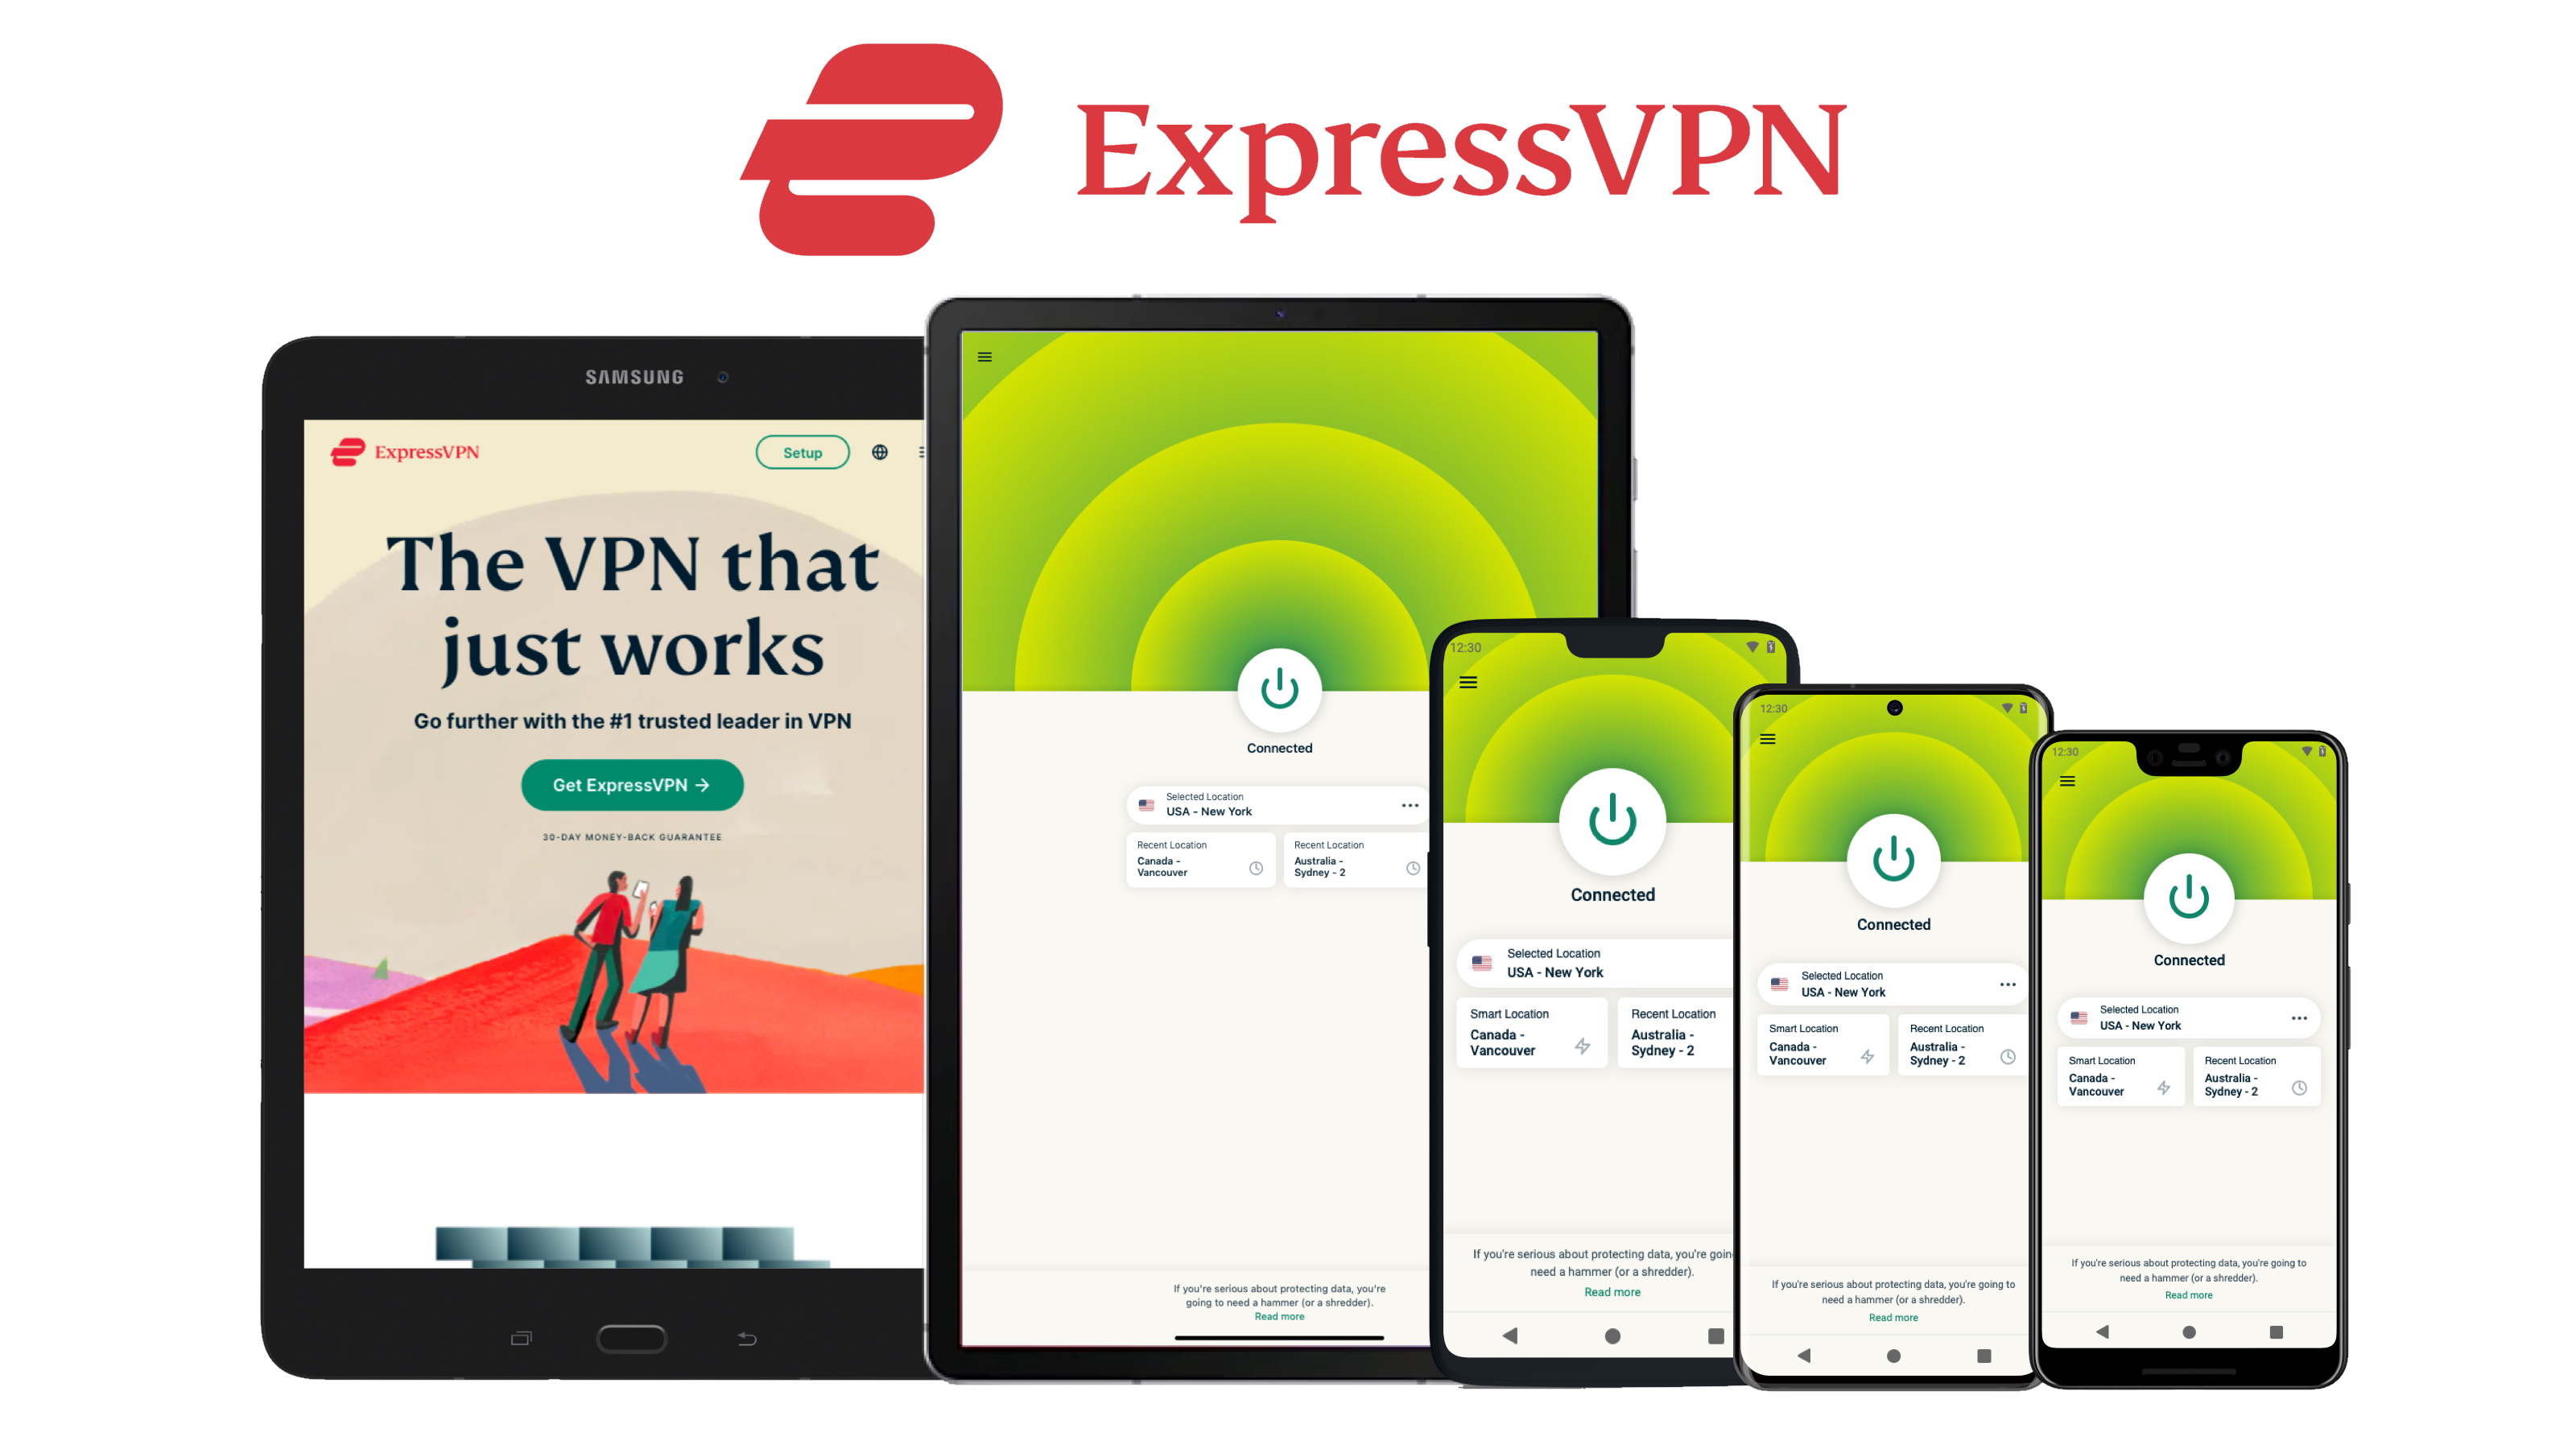 ExpressVPN op Android devices